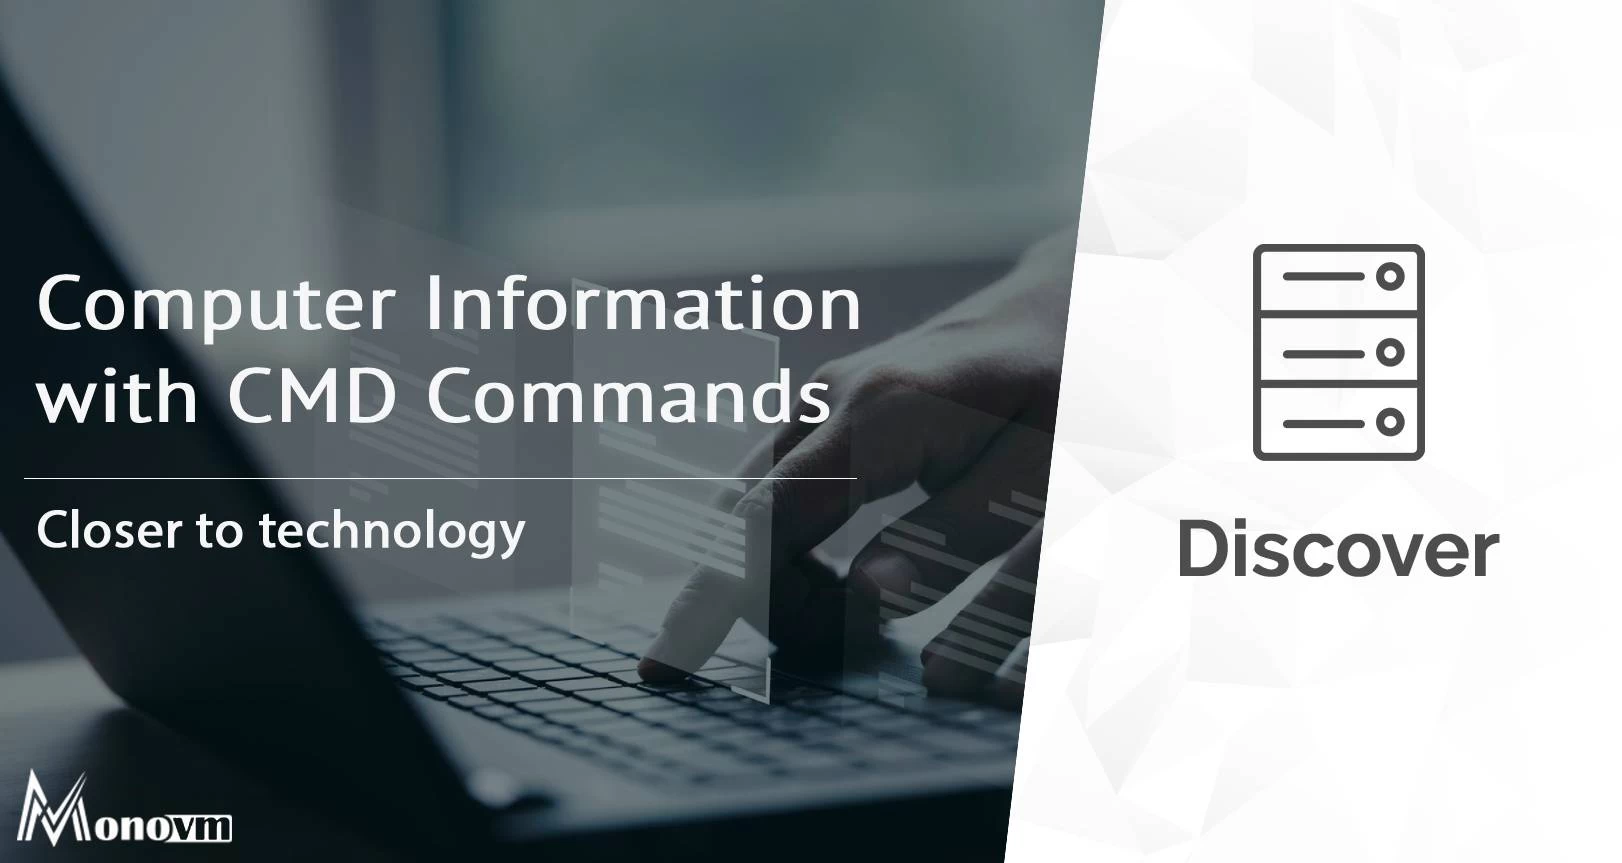 Computer Information with CMD Commands